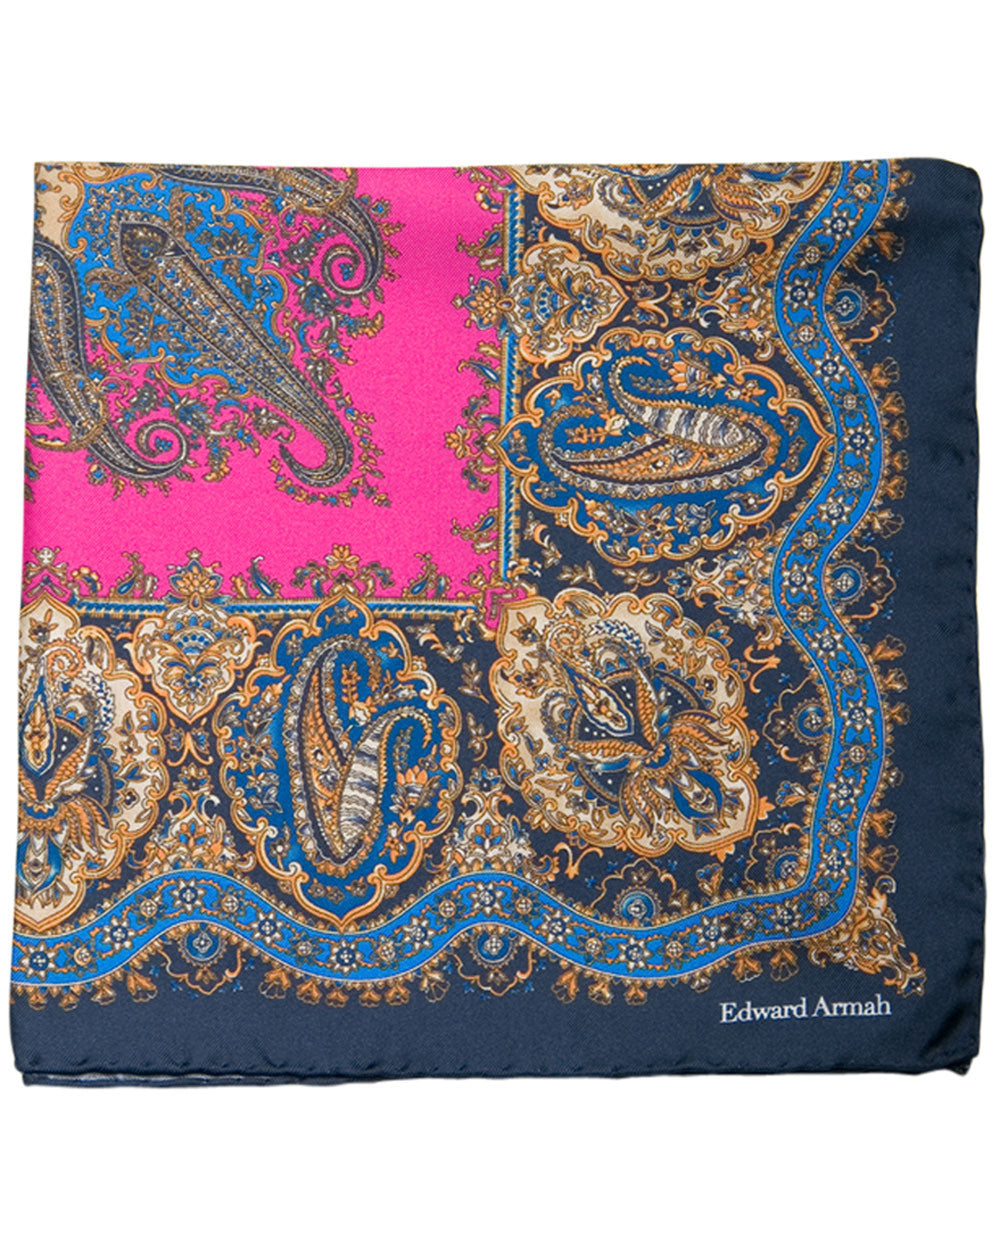 Persian Print Pocket Square in Navy and Hot Pink